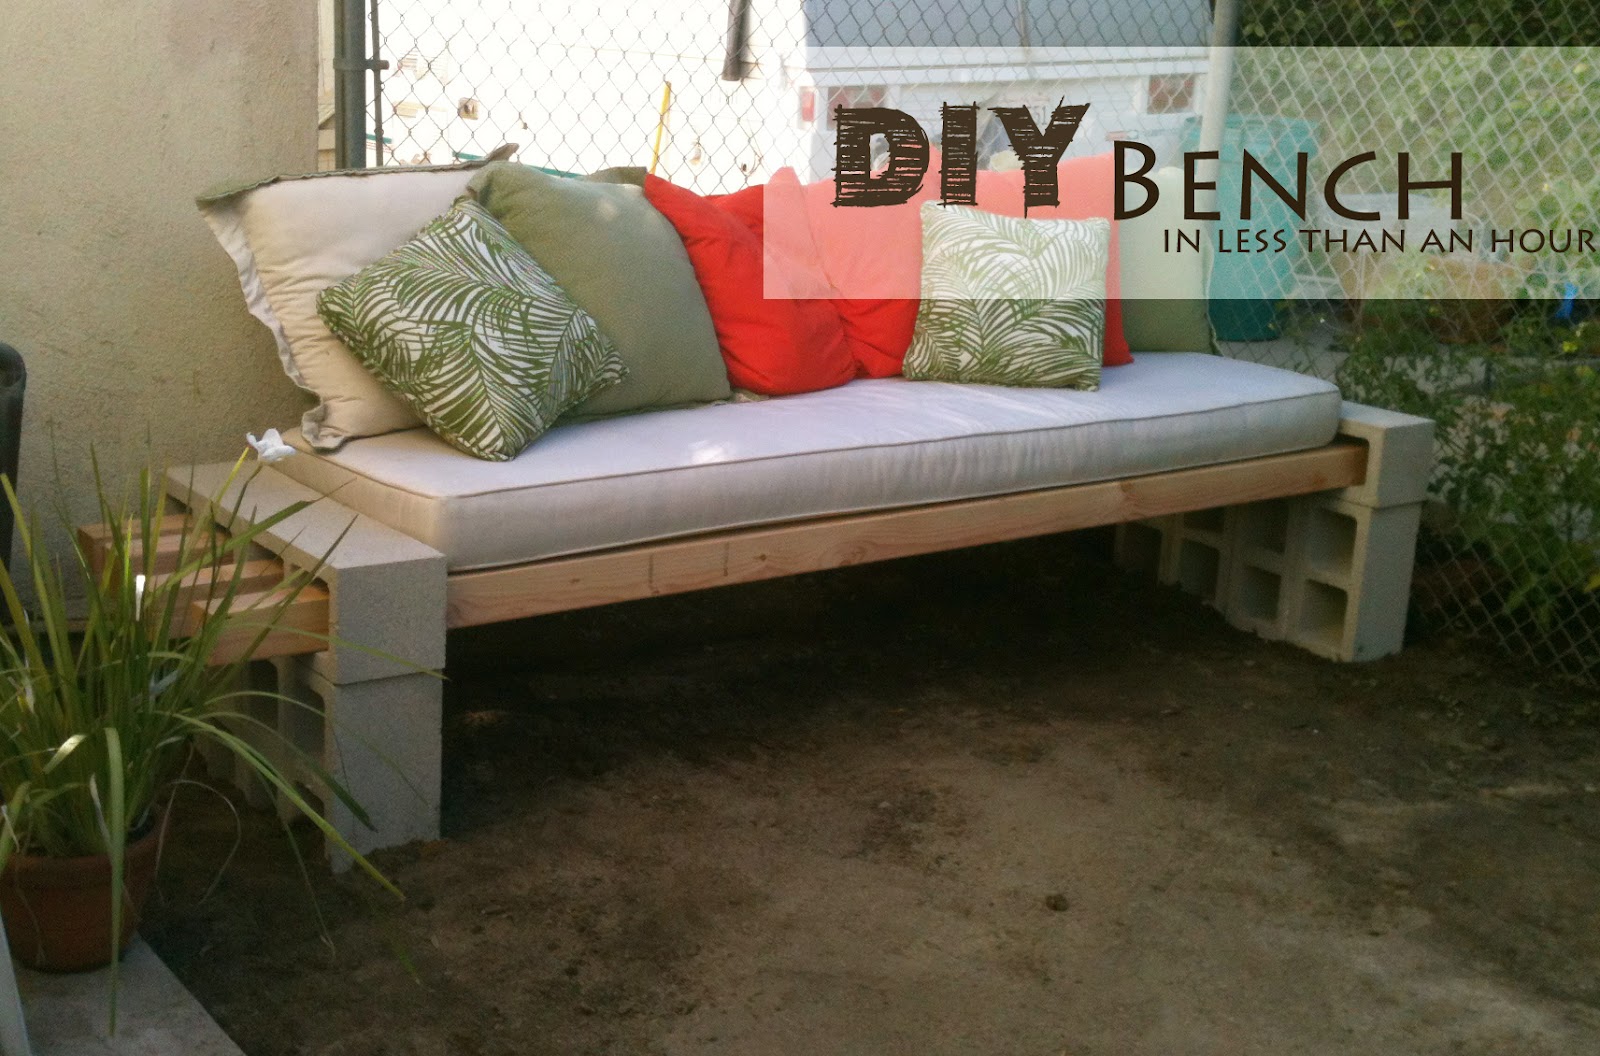 This is the fun bench we created!